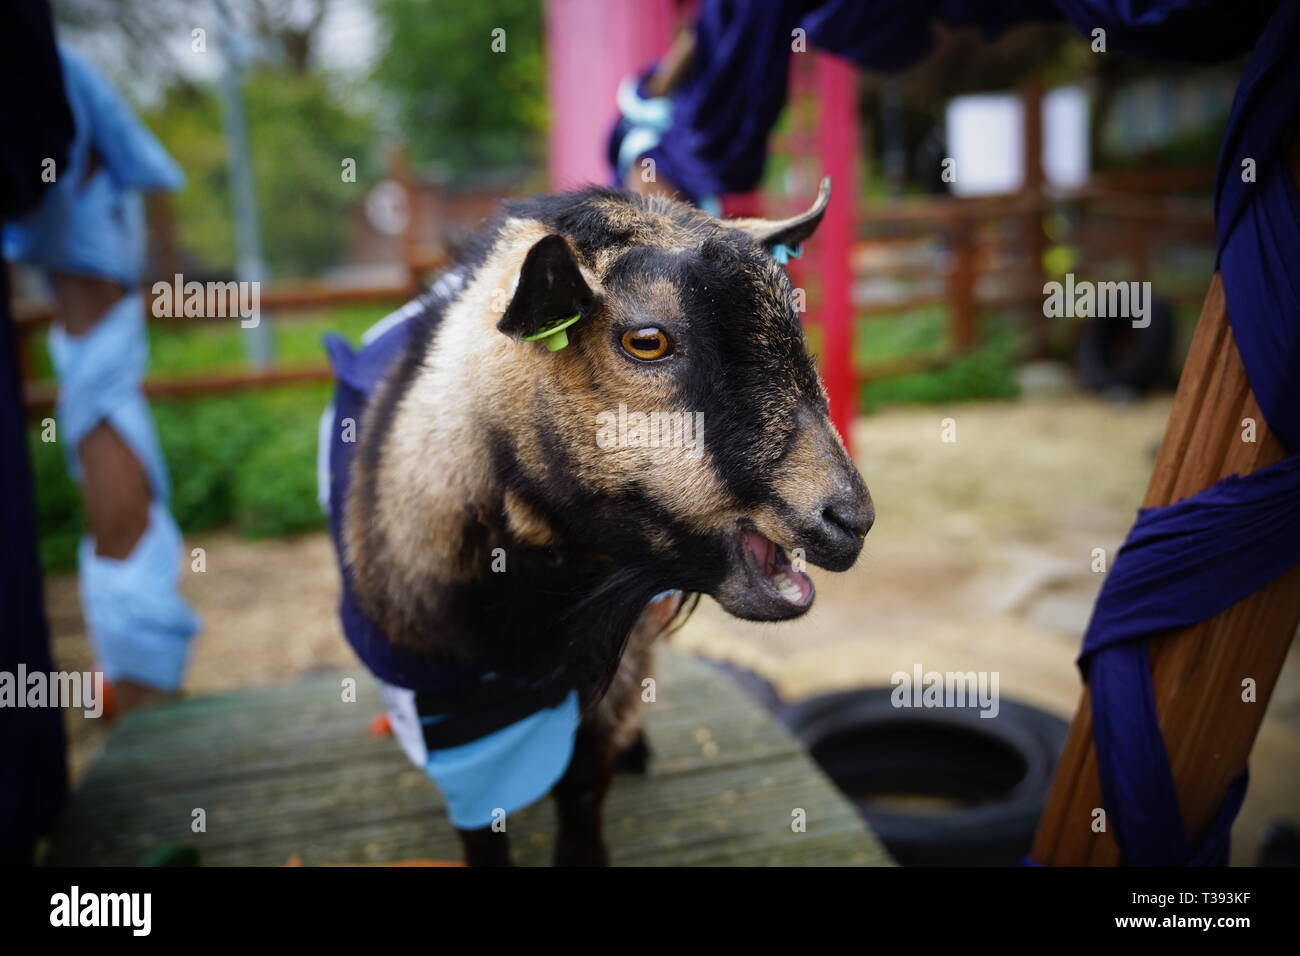 Coinciding with the Oxford & Cambridge Boat Race, two goats (one representing Oxford and one representing Cambridge) race for victory. Stock Photo